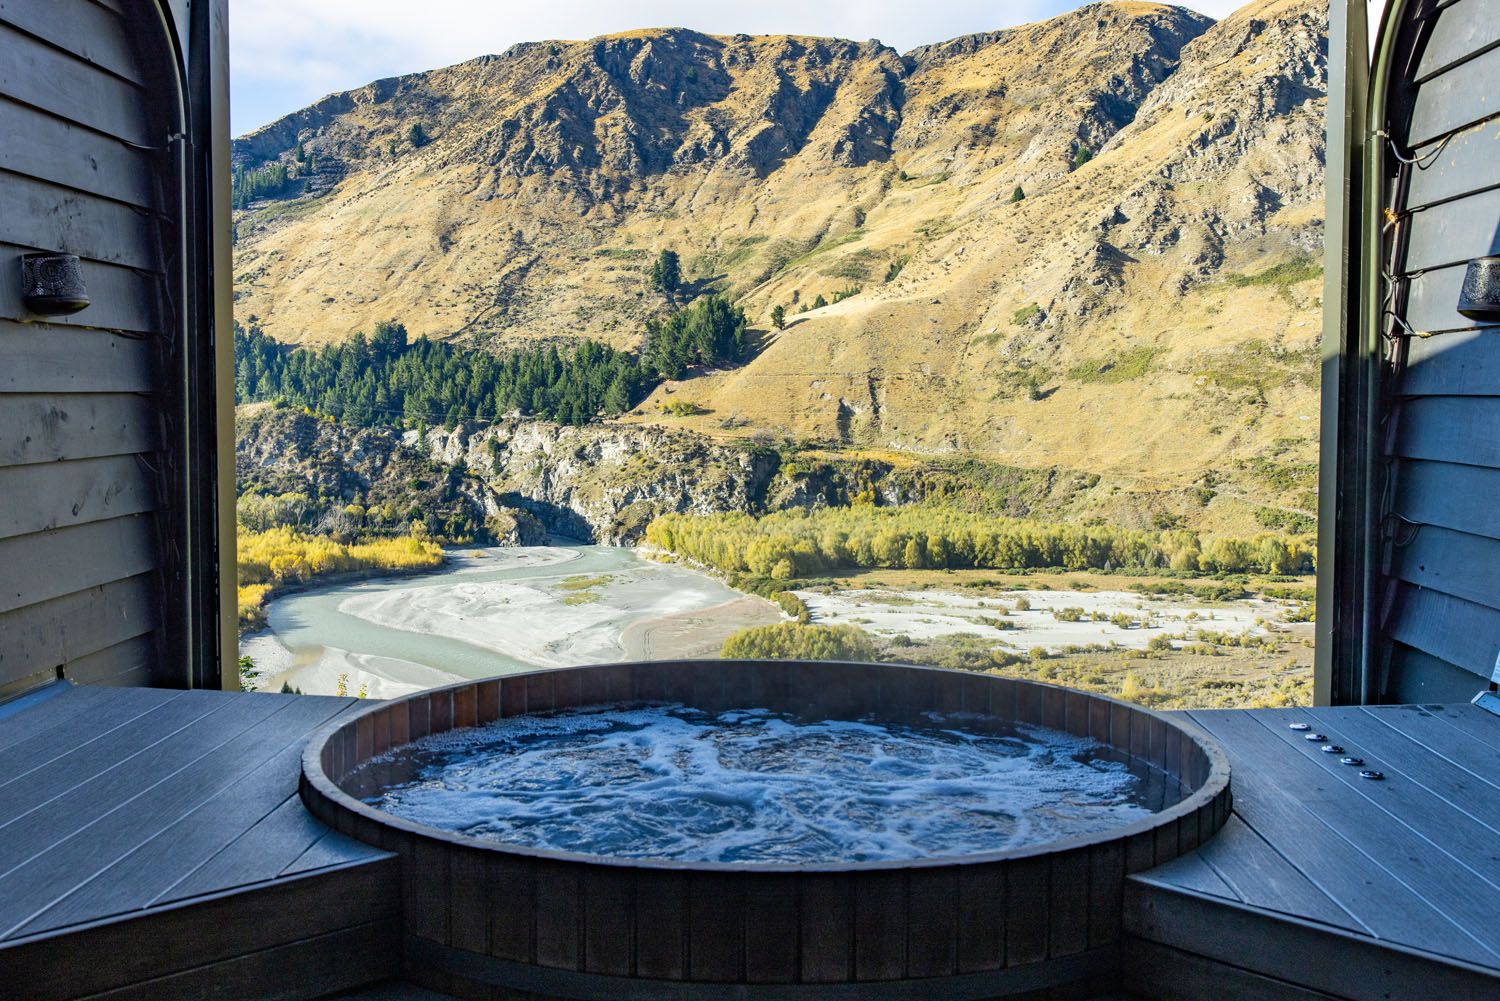 Onsen Hot Pools | Best Things to Do in Queenstown